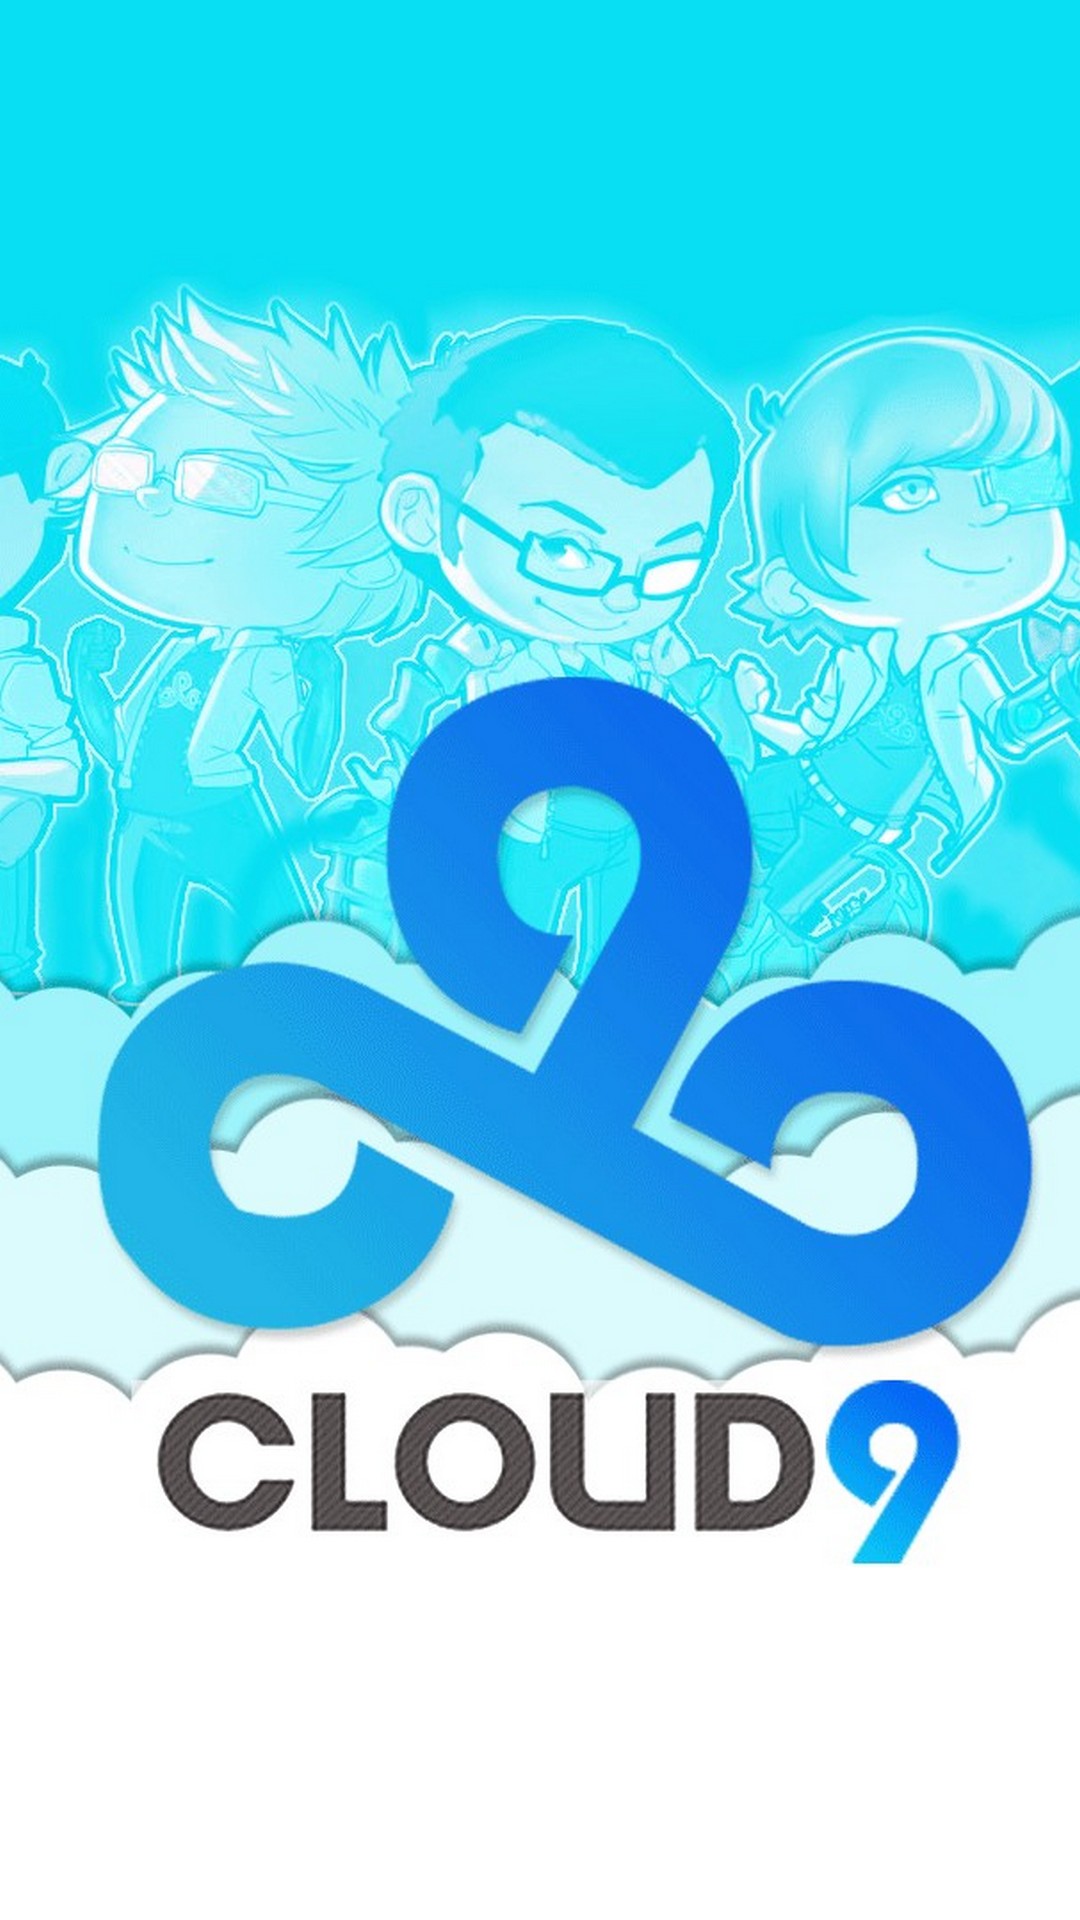 Cloud 9 Games Android Wallpaper with HD resolution 1080x1920